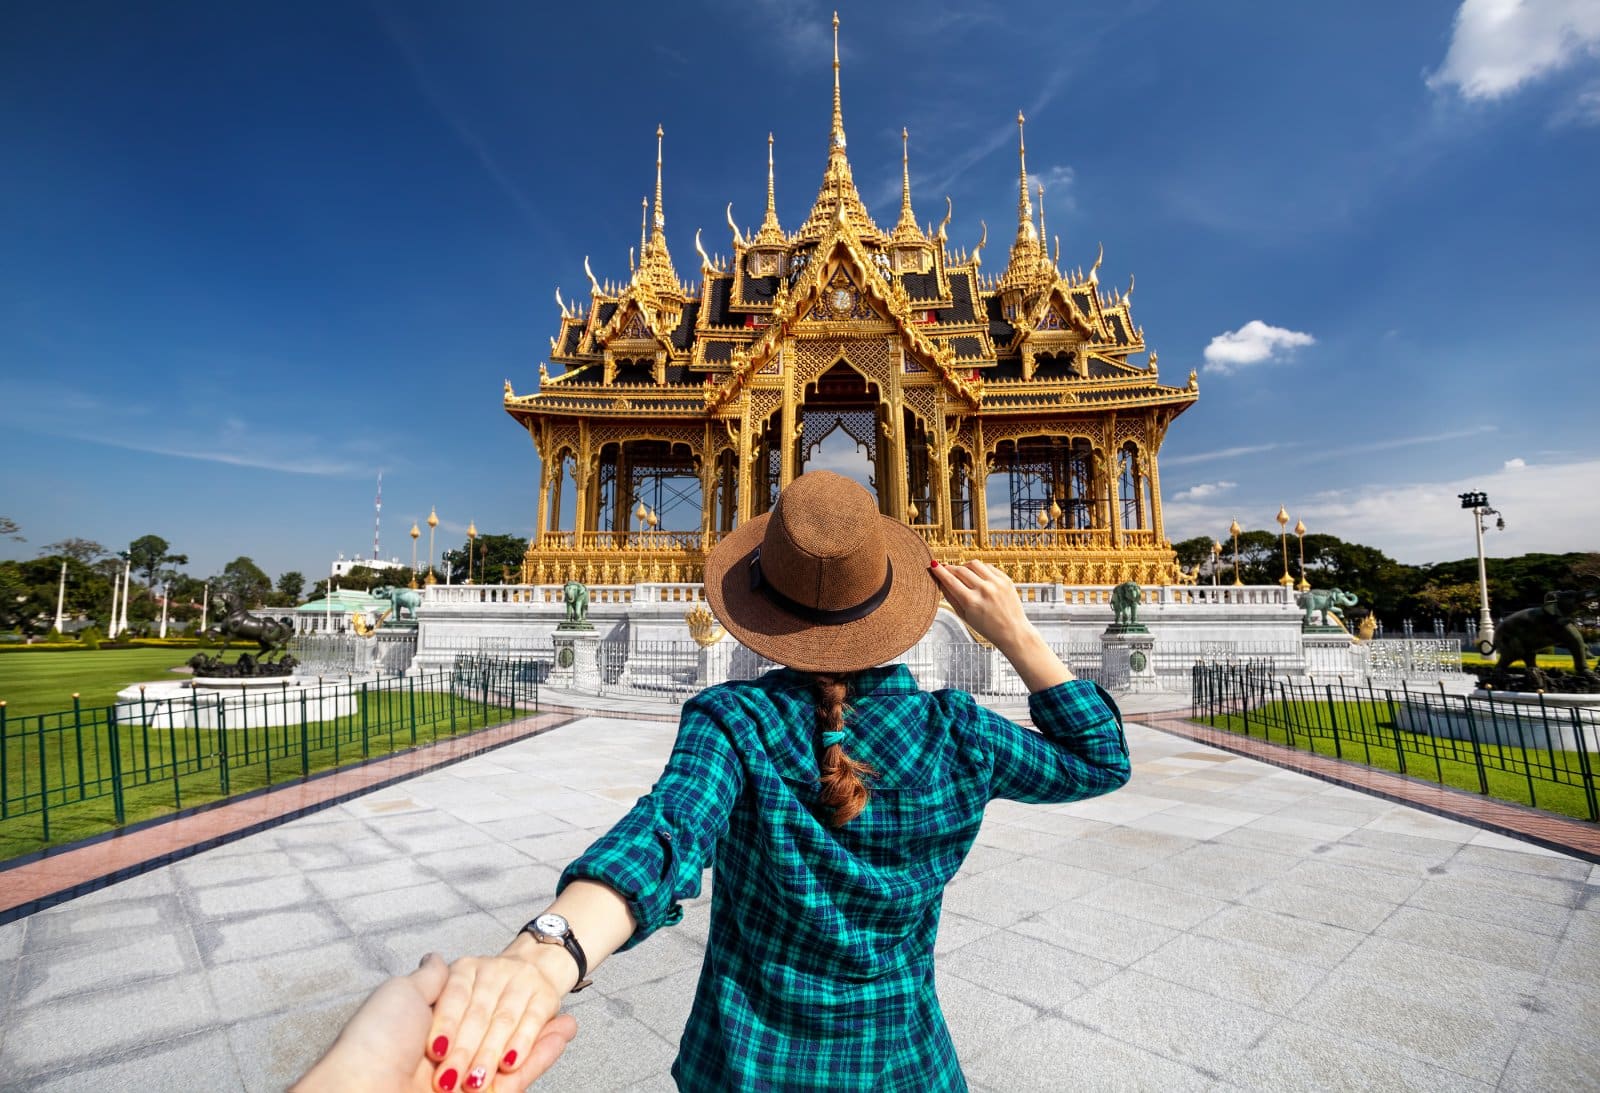 <p class="wp-caption-text">Image Credit: Shutterstock / Pikoso.kz</p>  <p><span>As the day wound down, we headed to Bangkok. The return trip offered us a moment to reflect on Ayutthaya’s historical and cultural richness, contrasting with the modern vibrancy of Thailand’s capital. We also slept!</span></p>